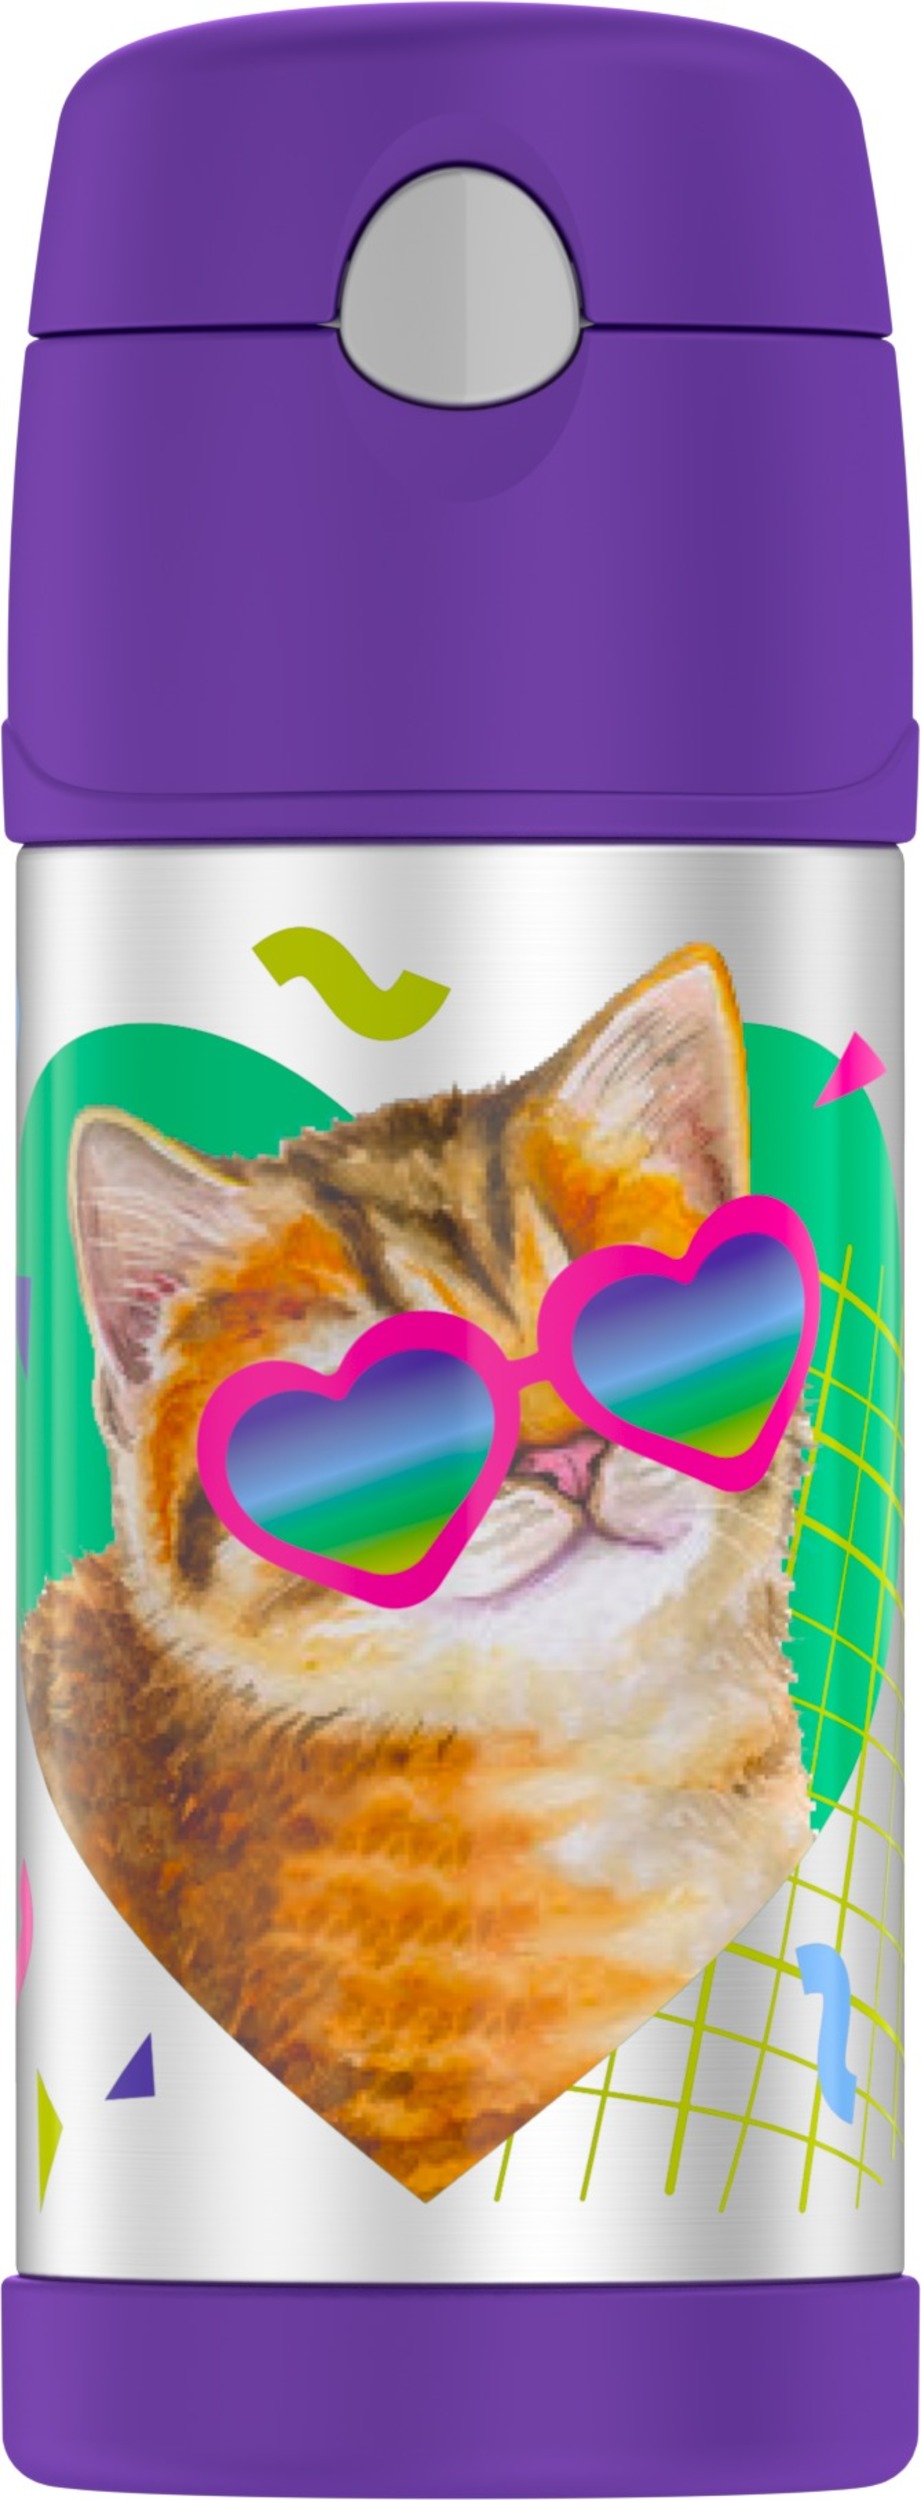 Thermos 12 Oz Funtainer Vacuum Insulated Stainless Steel Straw Bottle Cat - image 1 of 5